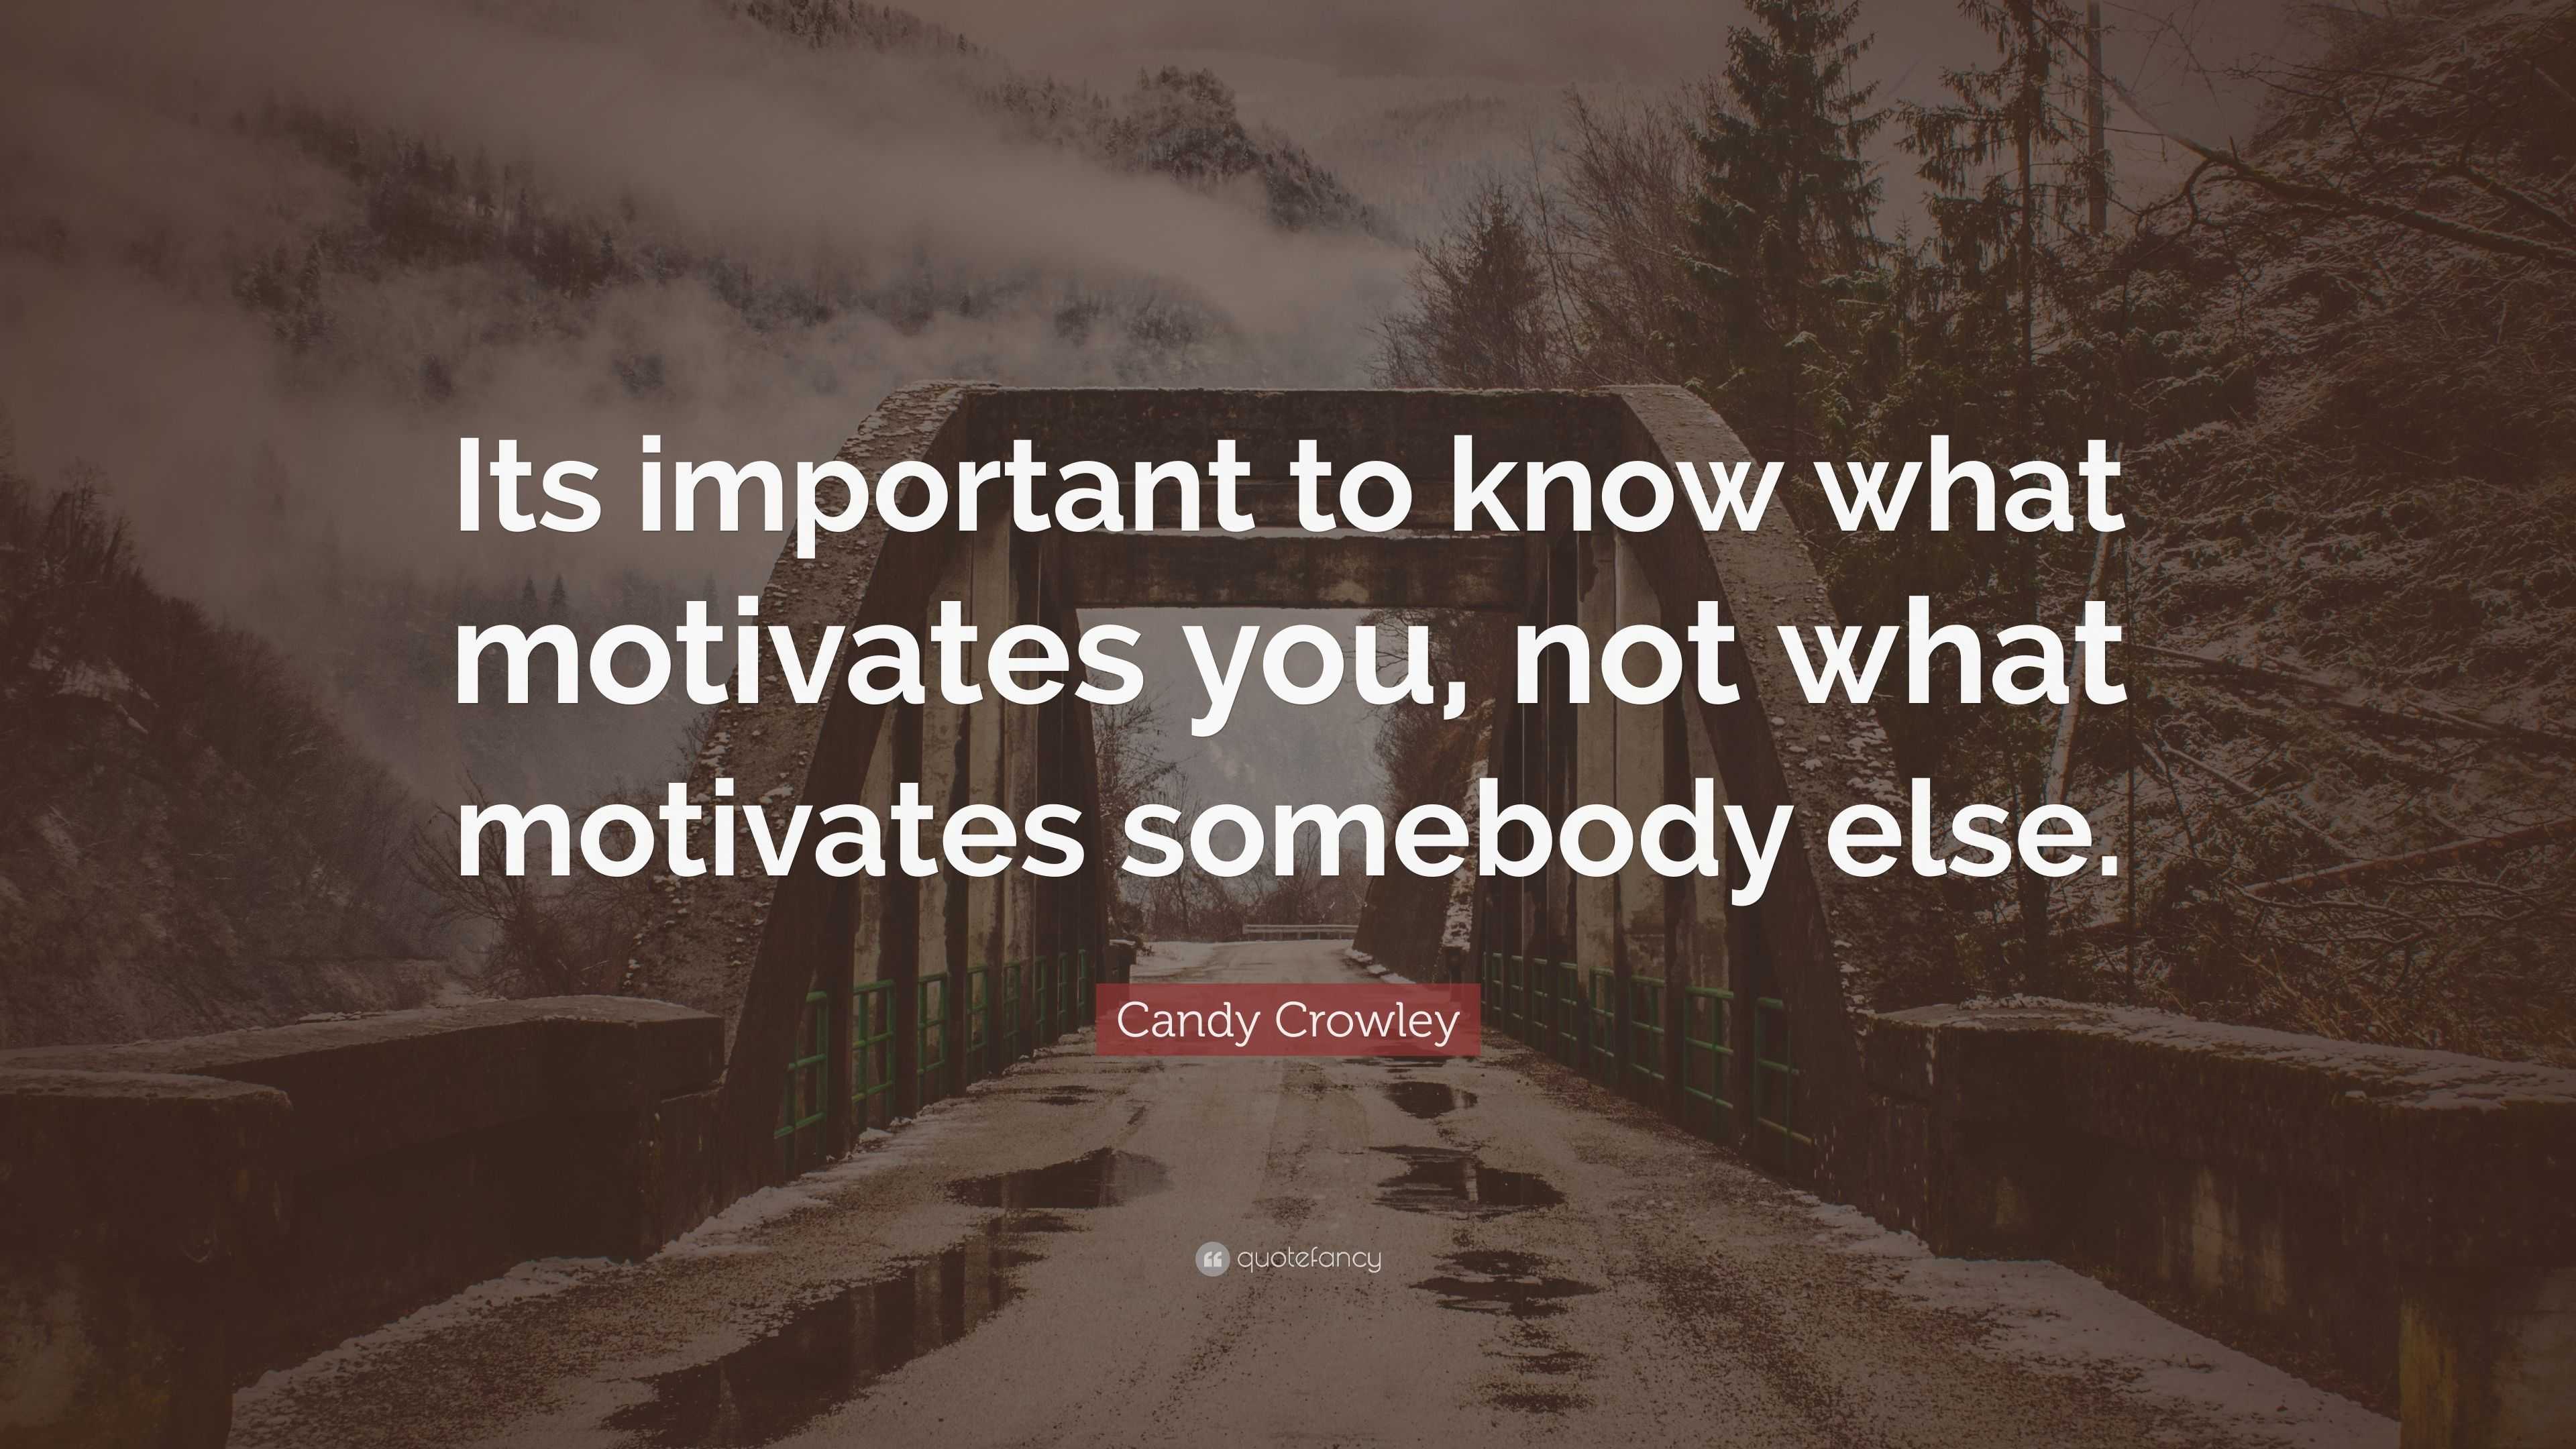 Candy Crowley Quote: “Its important to know what motivates you, not